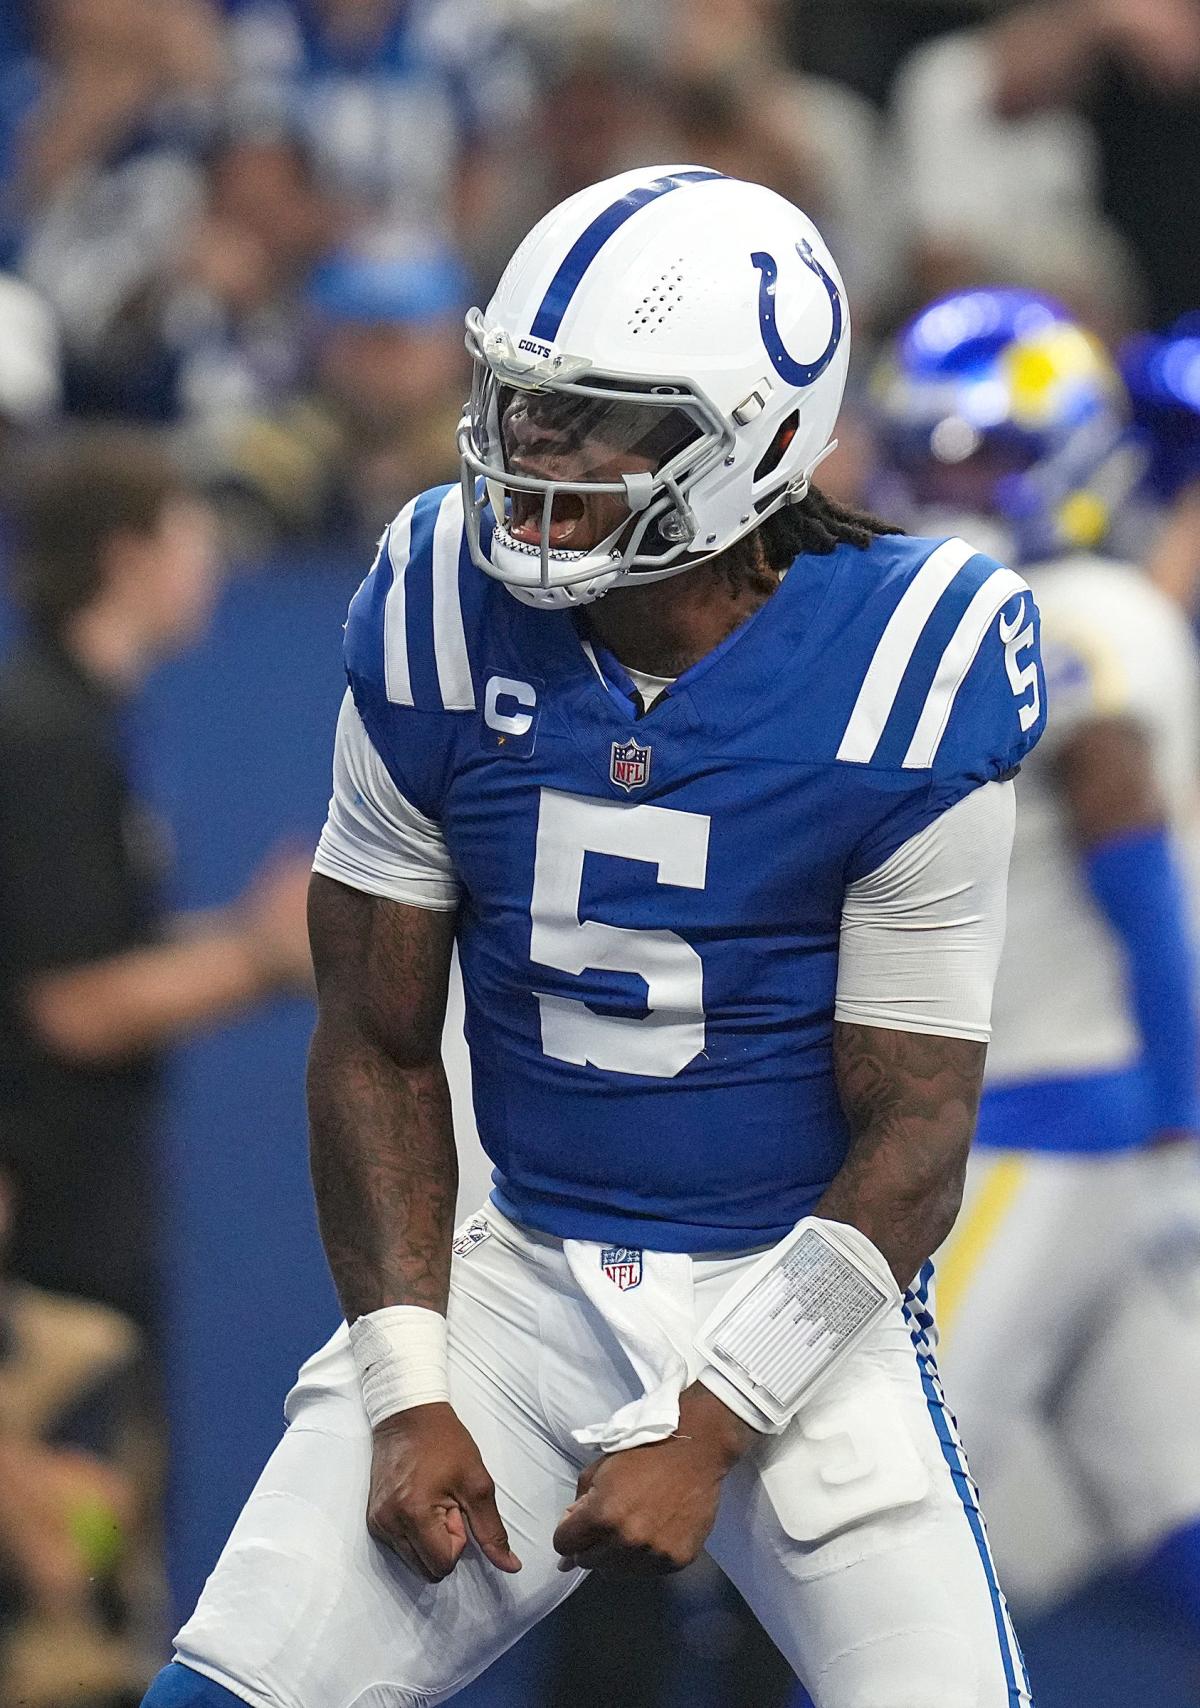 Tennessee Titans at Indianapolis Colts picks, predictions, odds: Who wins  NFL Week 5 game?